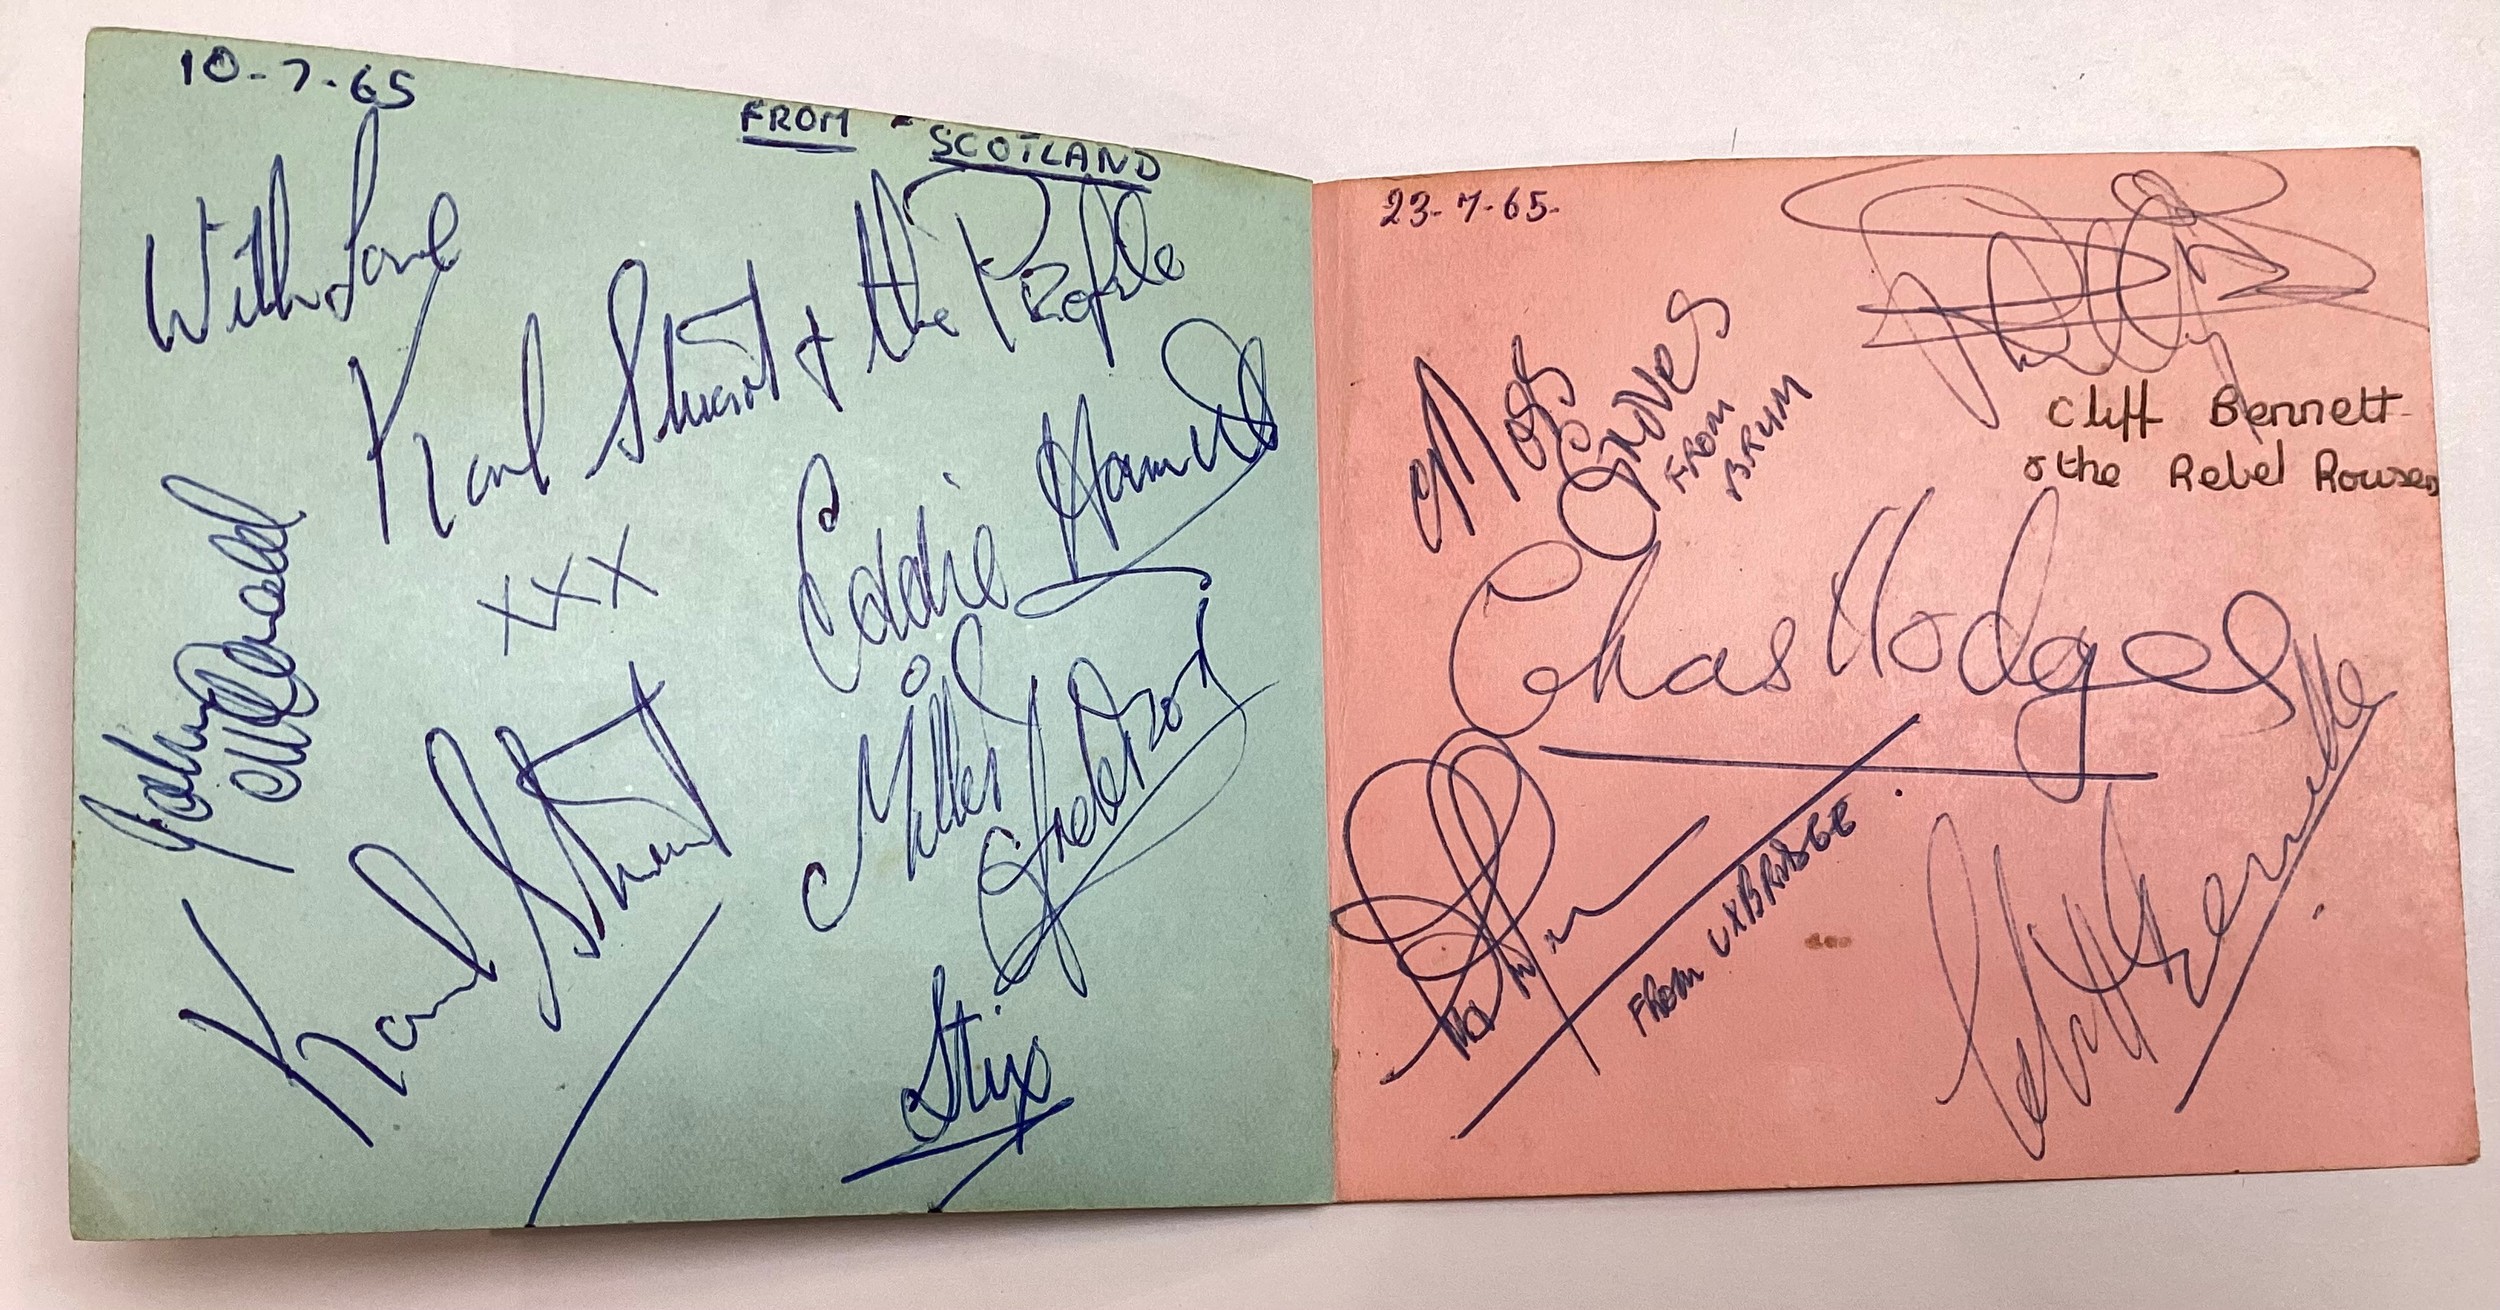 GENUINE 1960’S AUTOGRAPH BOOK CONTAINING VARIOUS POP / ROCK STARS. The book has seen better days - Image 9 of 14